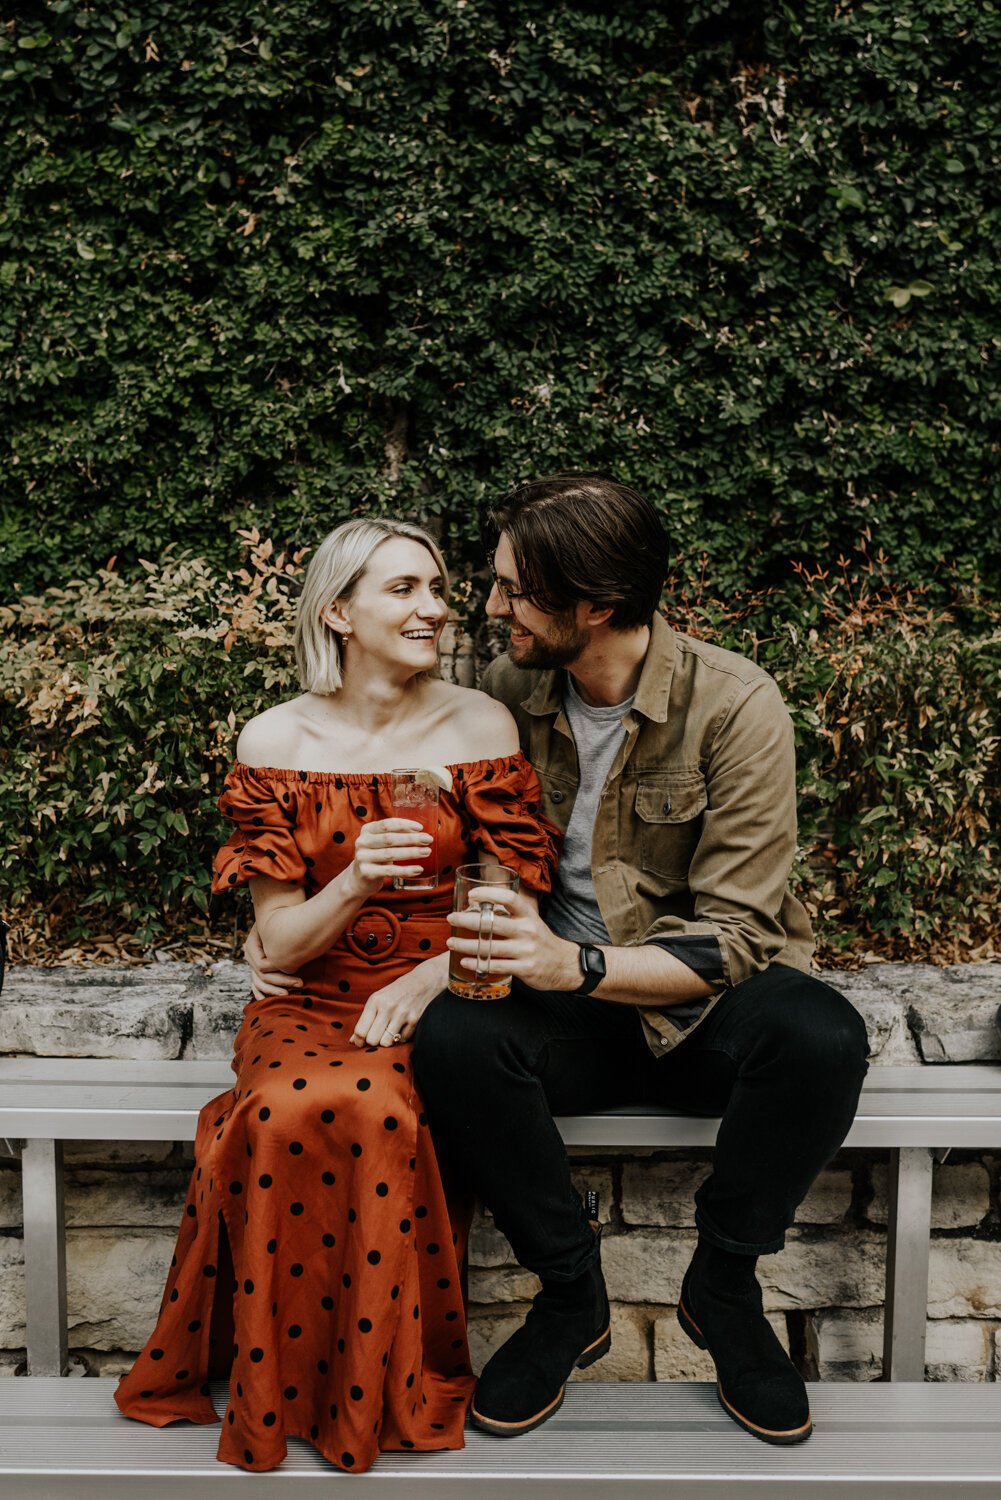 Easy Tiger in Austin, Texas Engagement Photos